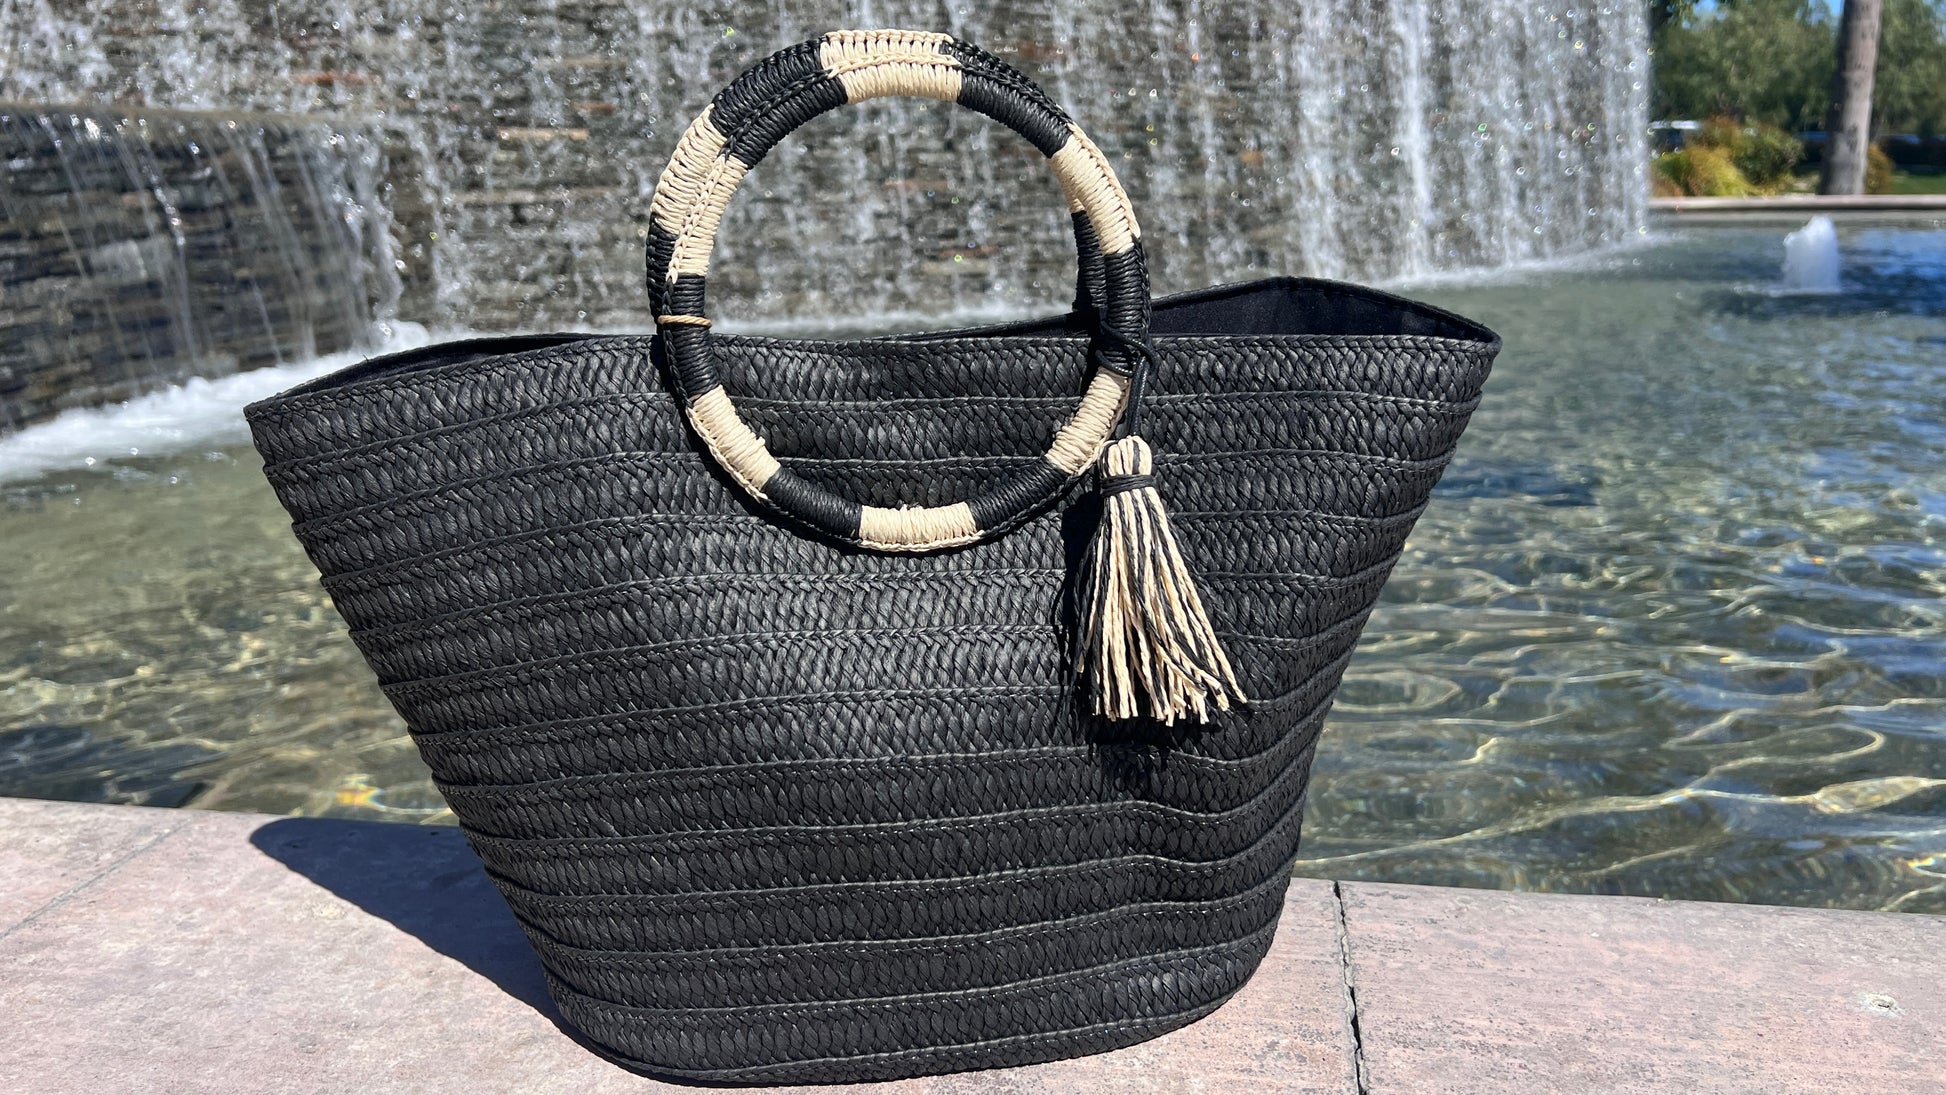 Straw Tote Bag - Style by me